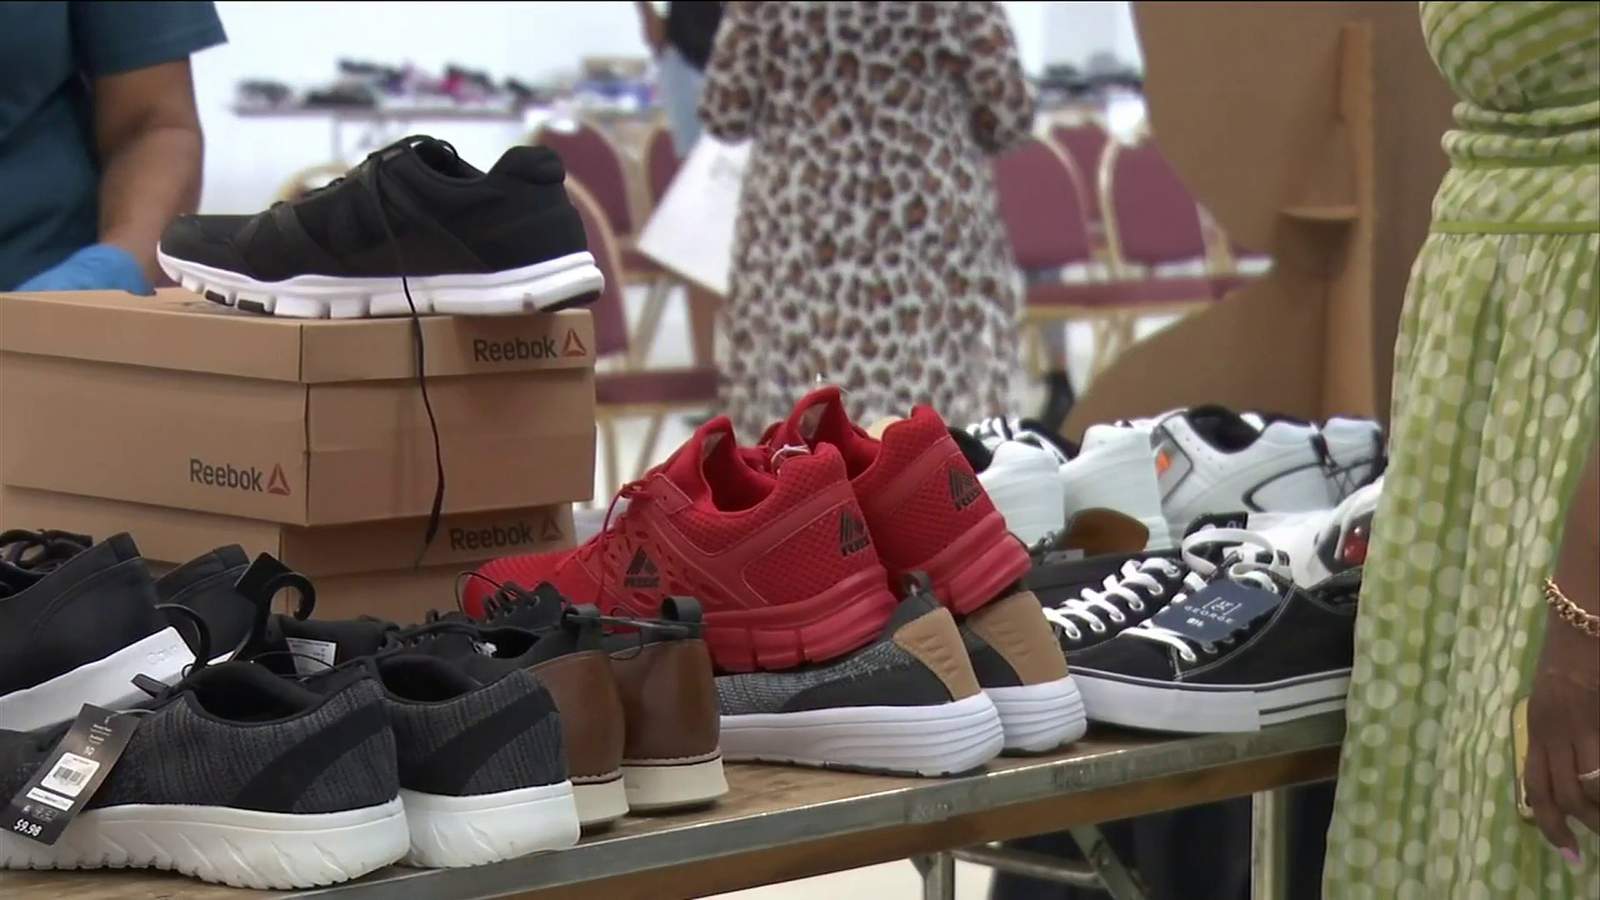 Hundreds of students take home new shoes at Kicks for the Kids event